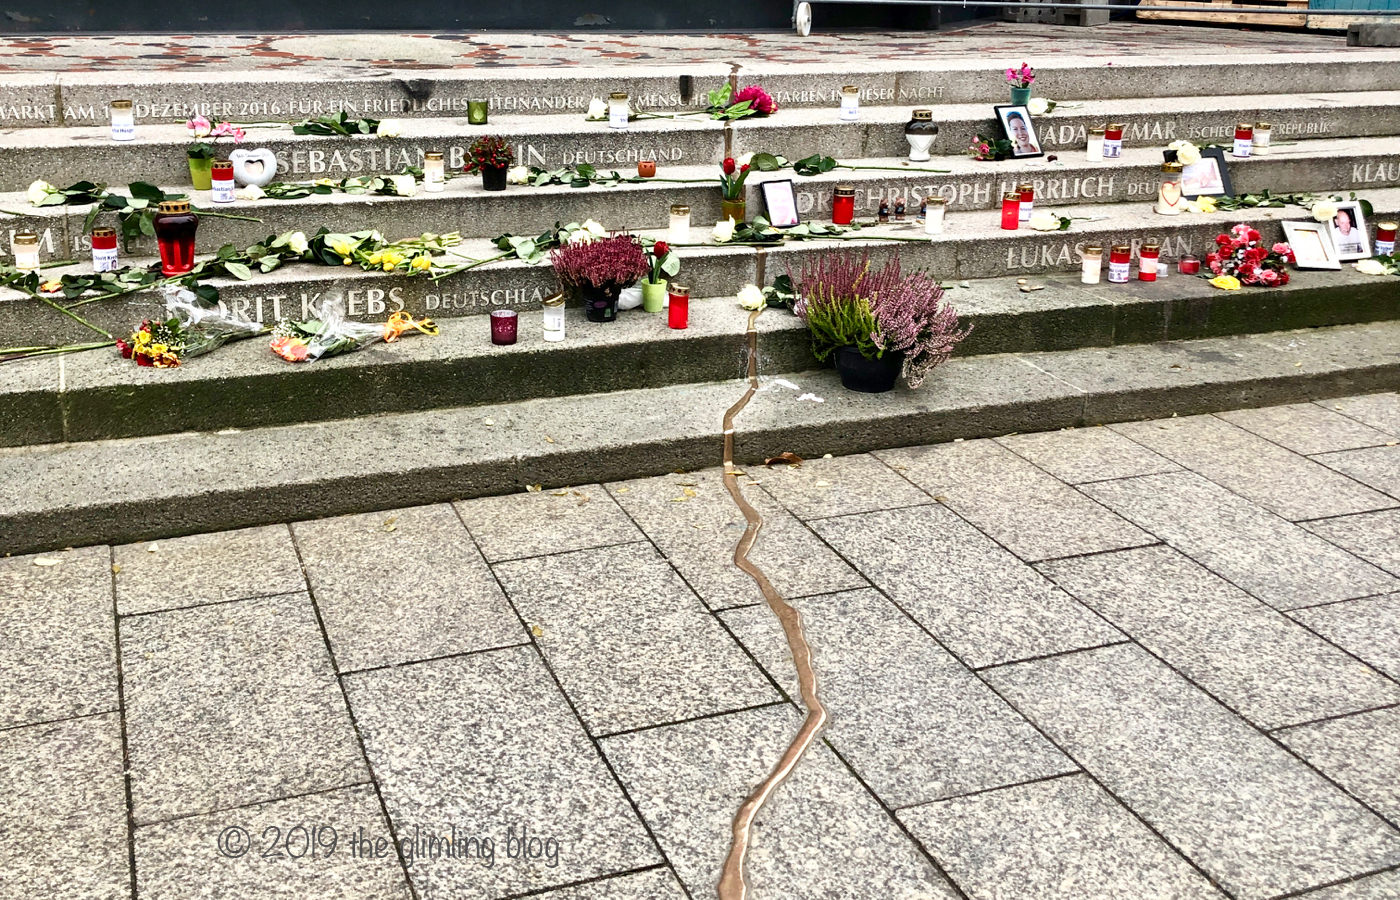 Memorial of the terror attack on the Christmas market at the Gedächtniskirche in 2016.